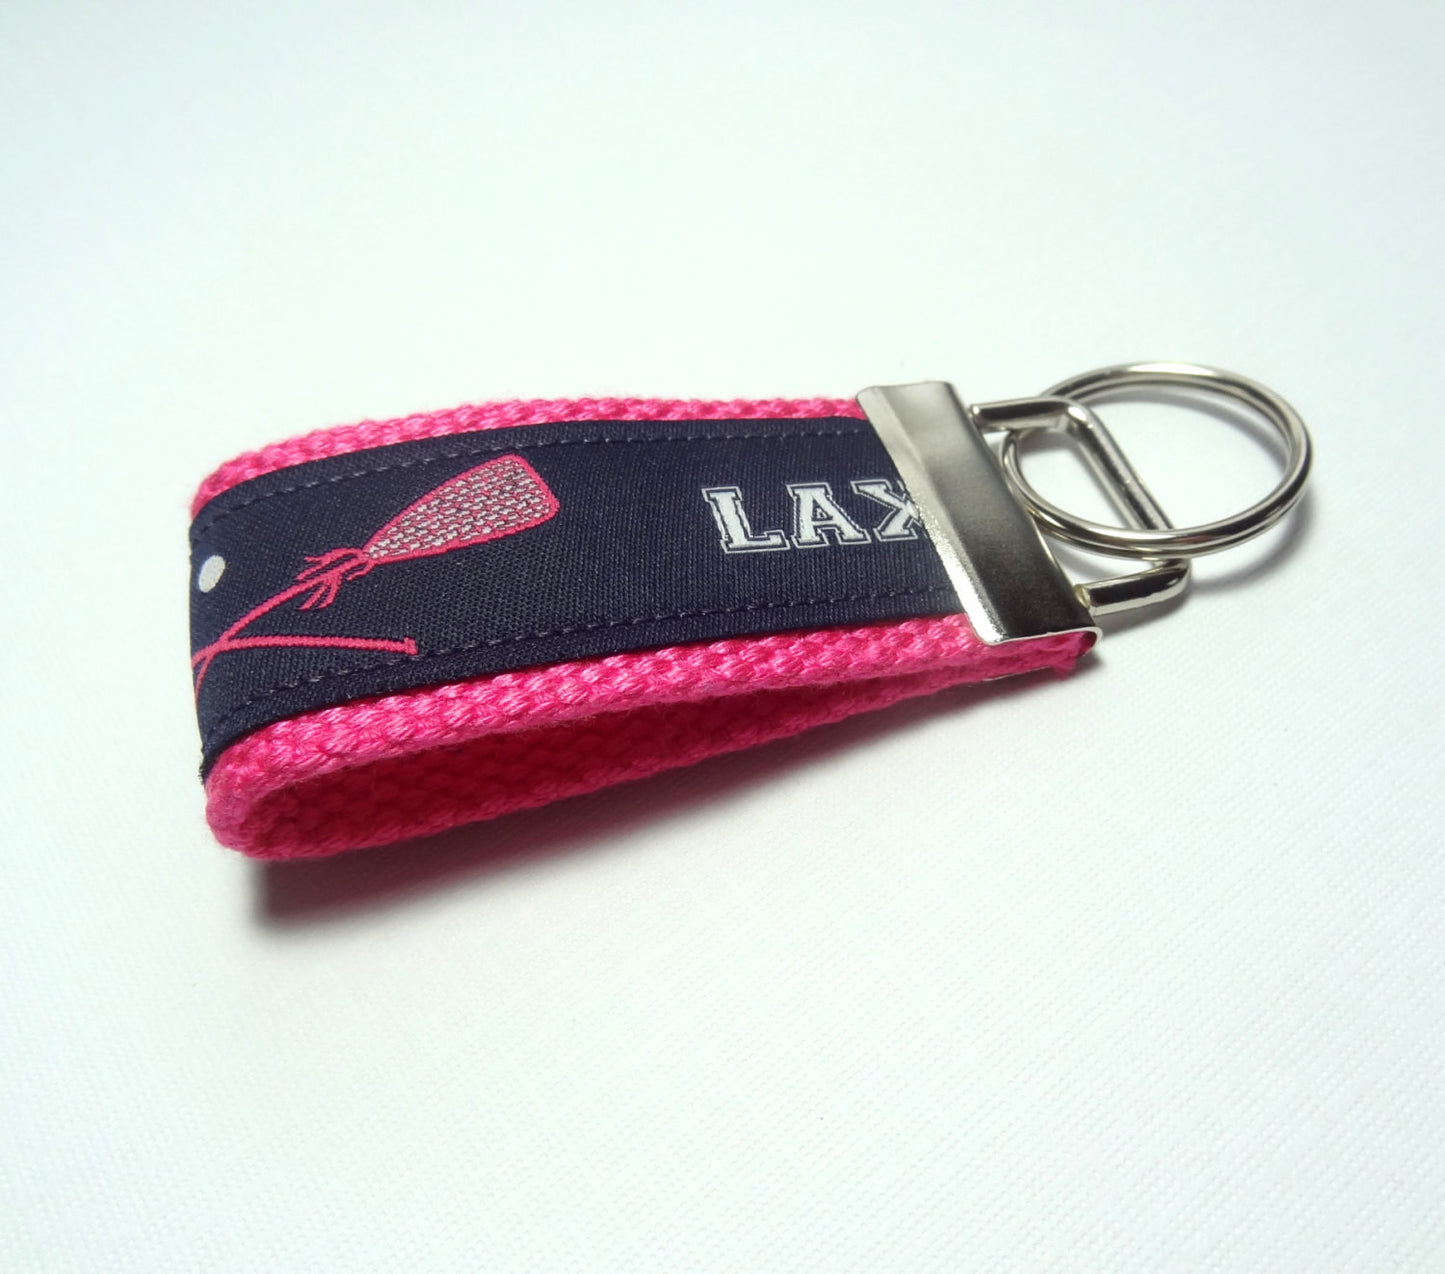 Key Fob (Small): Navy Blue and Pink LAX Lacrosse Themed Key Fob Key Chain